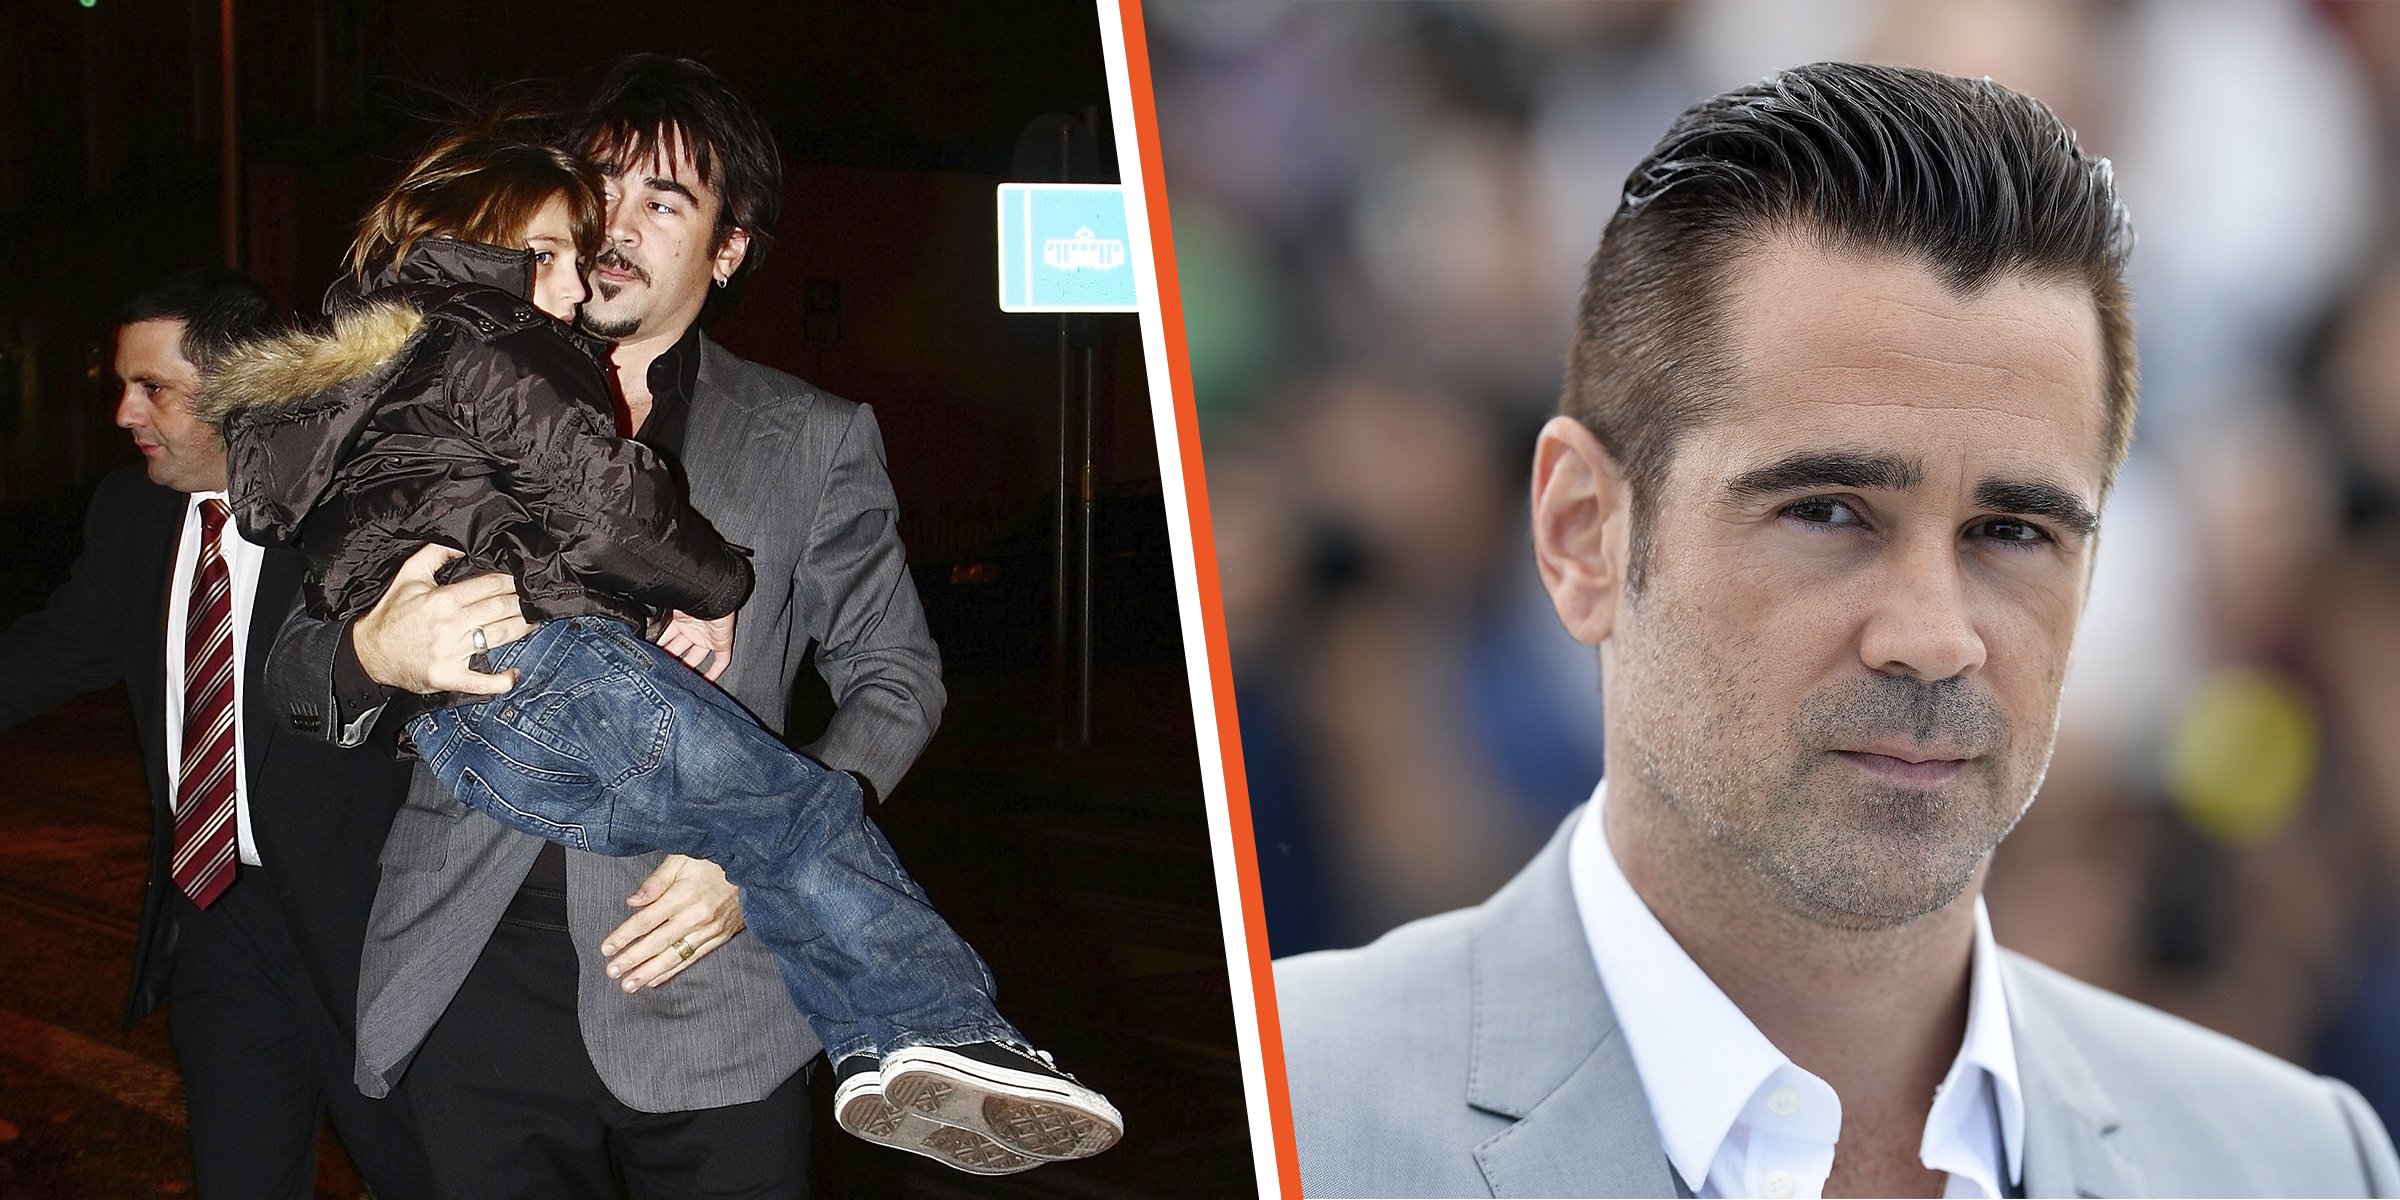 James Padraig and Colin Farrell | Colin Farrell | Source: Getty Images